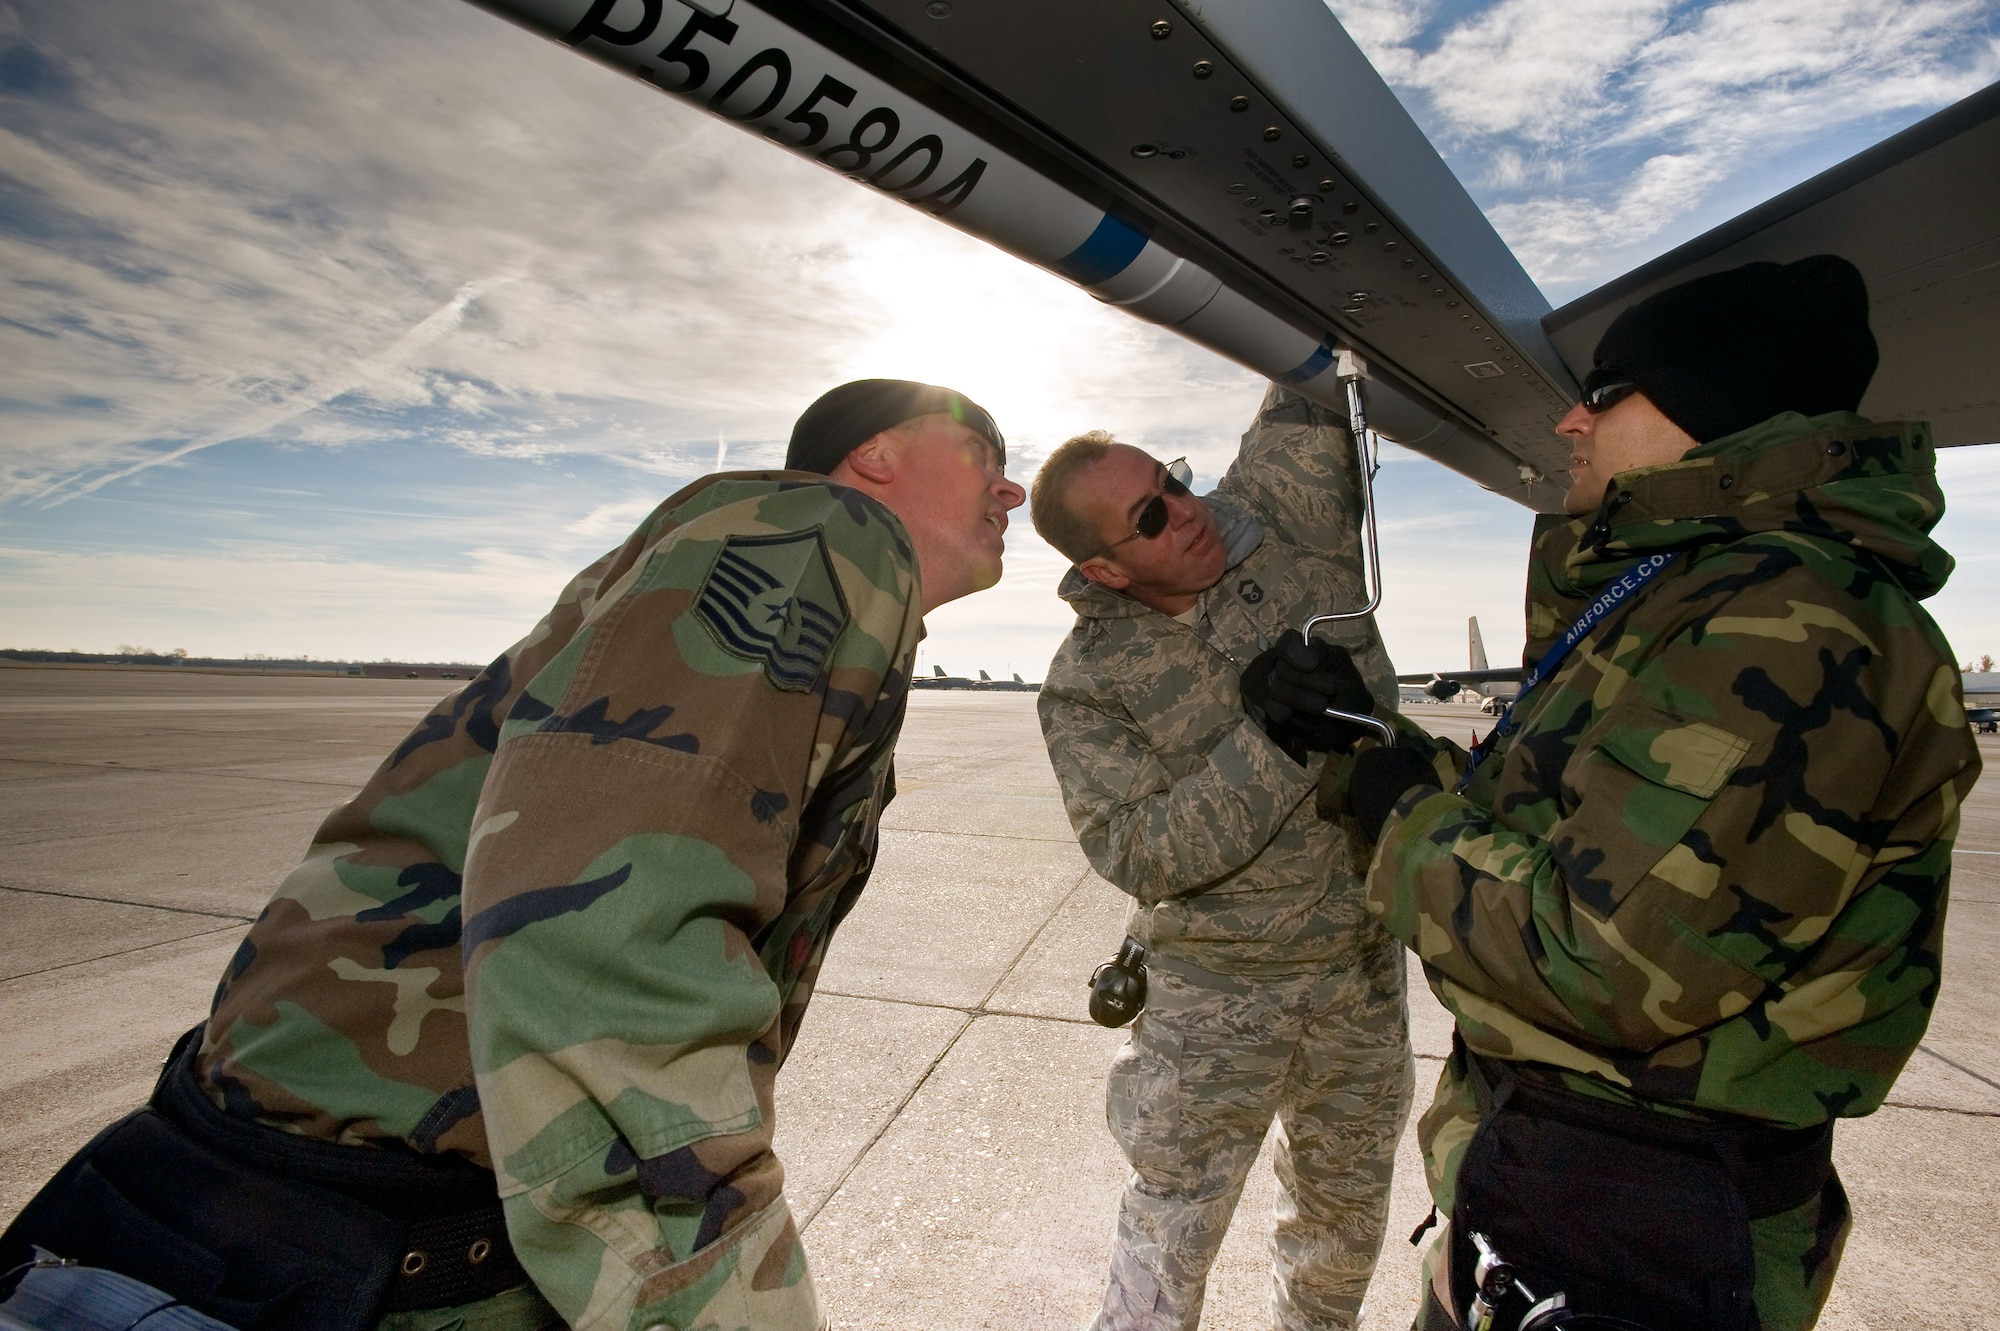 Staff Sgt. Richard Martinez tightens a mount that holds an air combat maneuvering instrumentation pod to the wing of an F-16 Fighting Falcon as Senior Master Sgt. Mark Jones and Master Sgt. Mark Caton observe and ensure it seats properly at Green Flag East at Barksdale Air Force Base, La. The Colorado Air National Guard members from Buckley AFB, Colo., are taking part in a predeployment exercise for Air Combat Command flying units. Sergeant Martinez is a 140th Aircraft Maintenance Squadron aircraft weapons specialist, Sergeant Jones is the 140th Maintenance Squadron weapons element NCO in charge, and Sergeant Caton is an aircraft armament specialist. (U.S. Air Force photo/Master Sgt. John Nimmo Sr.) 
